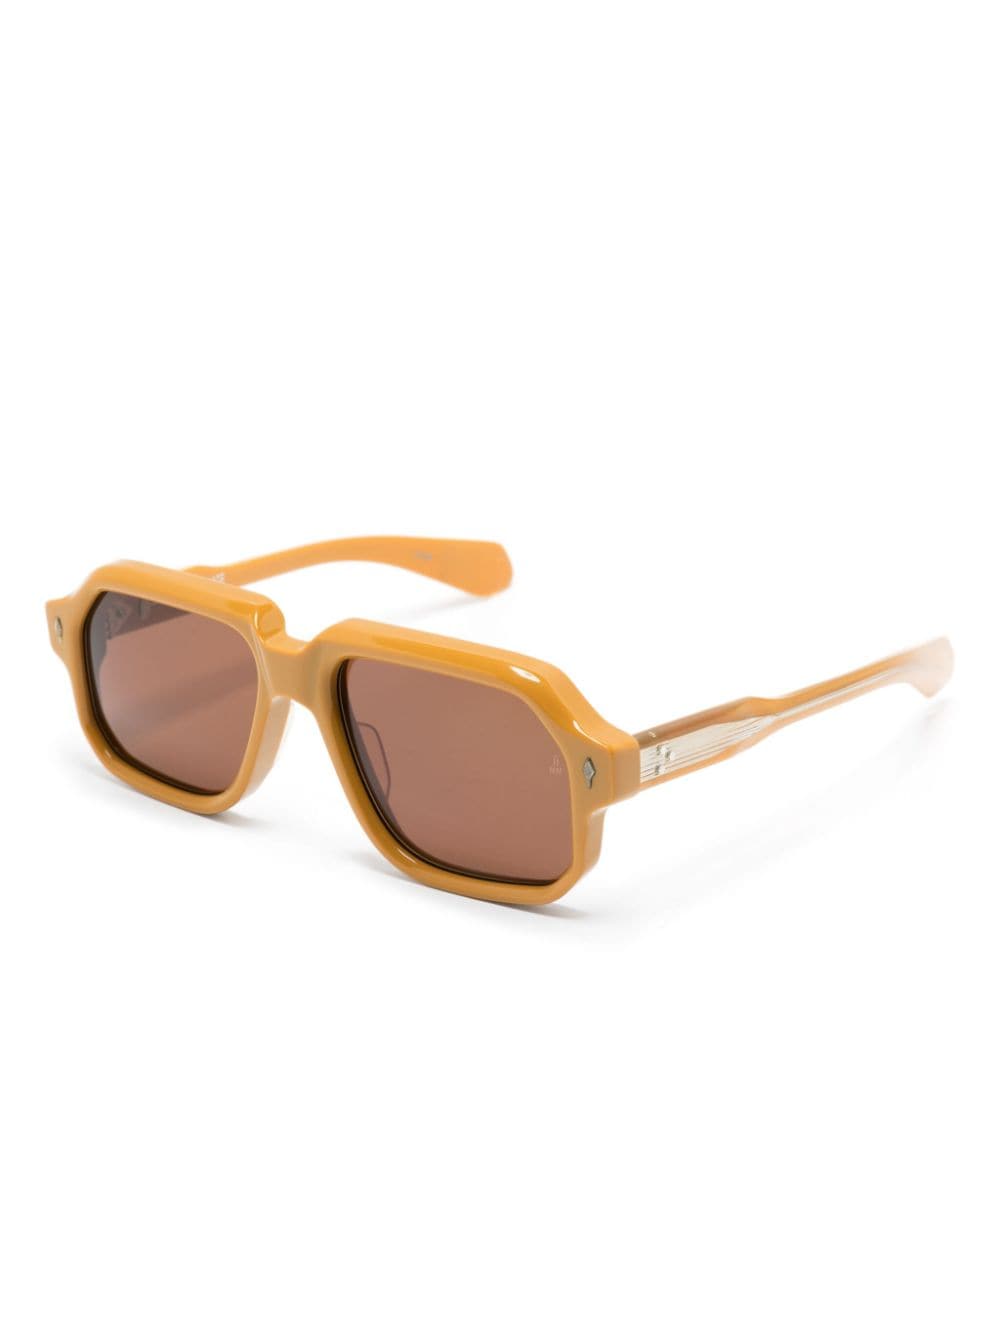 Jacques Marie Mage JACQUES MARIE MAGE- Challenger Sunglasses